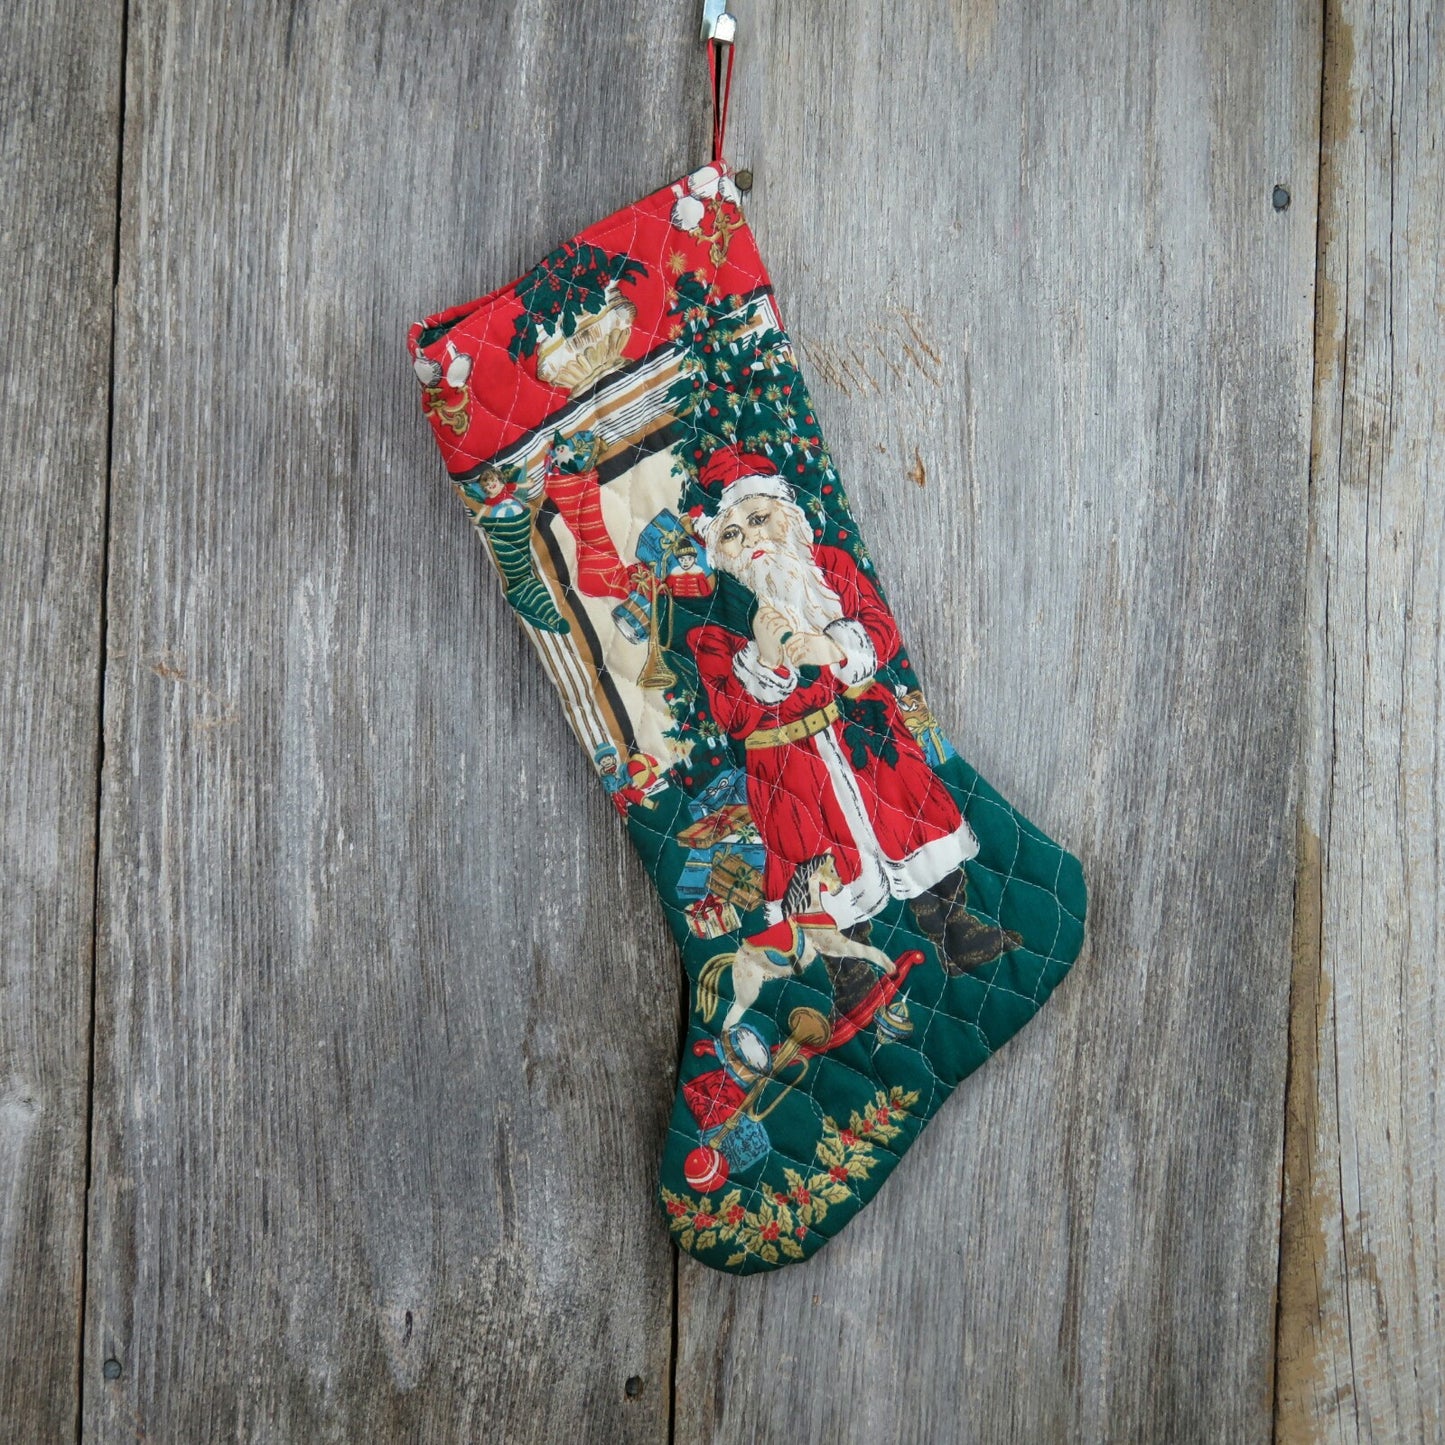 Vintage Santa Stocking Christmas Handmade Quilted Fabric Toys Tree Gifts Rocking Horse ST119 - At Grandma's Table